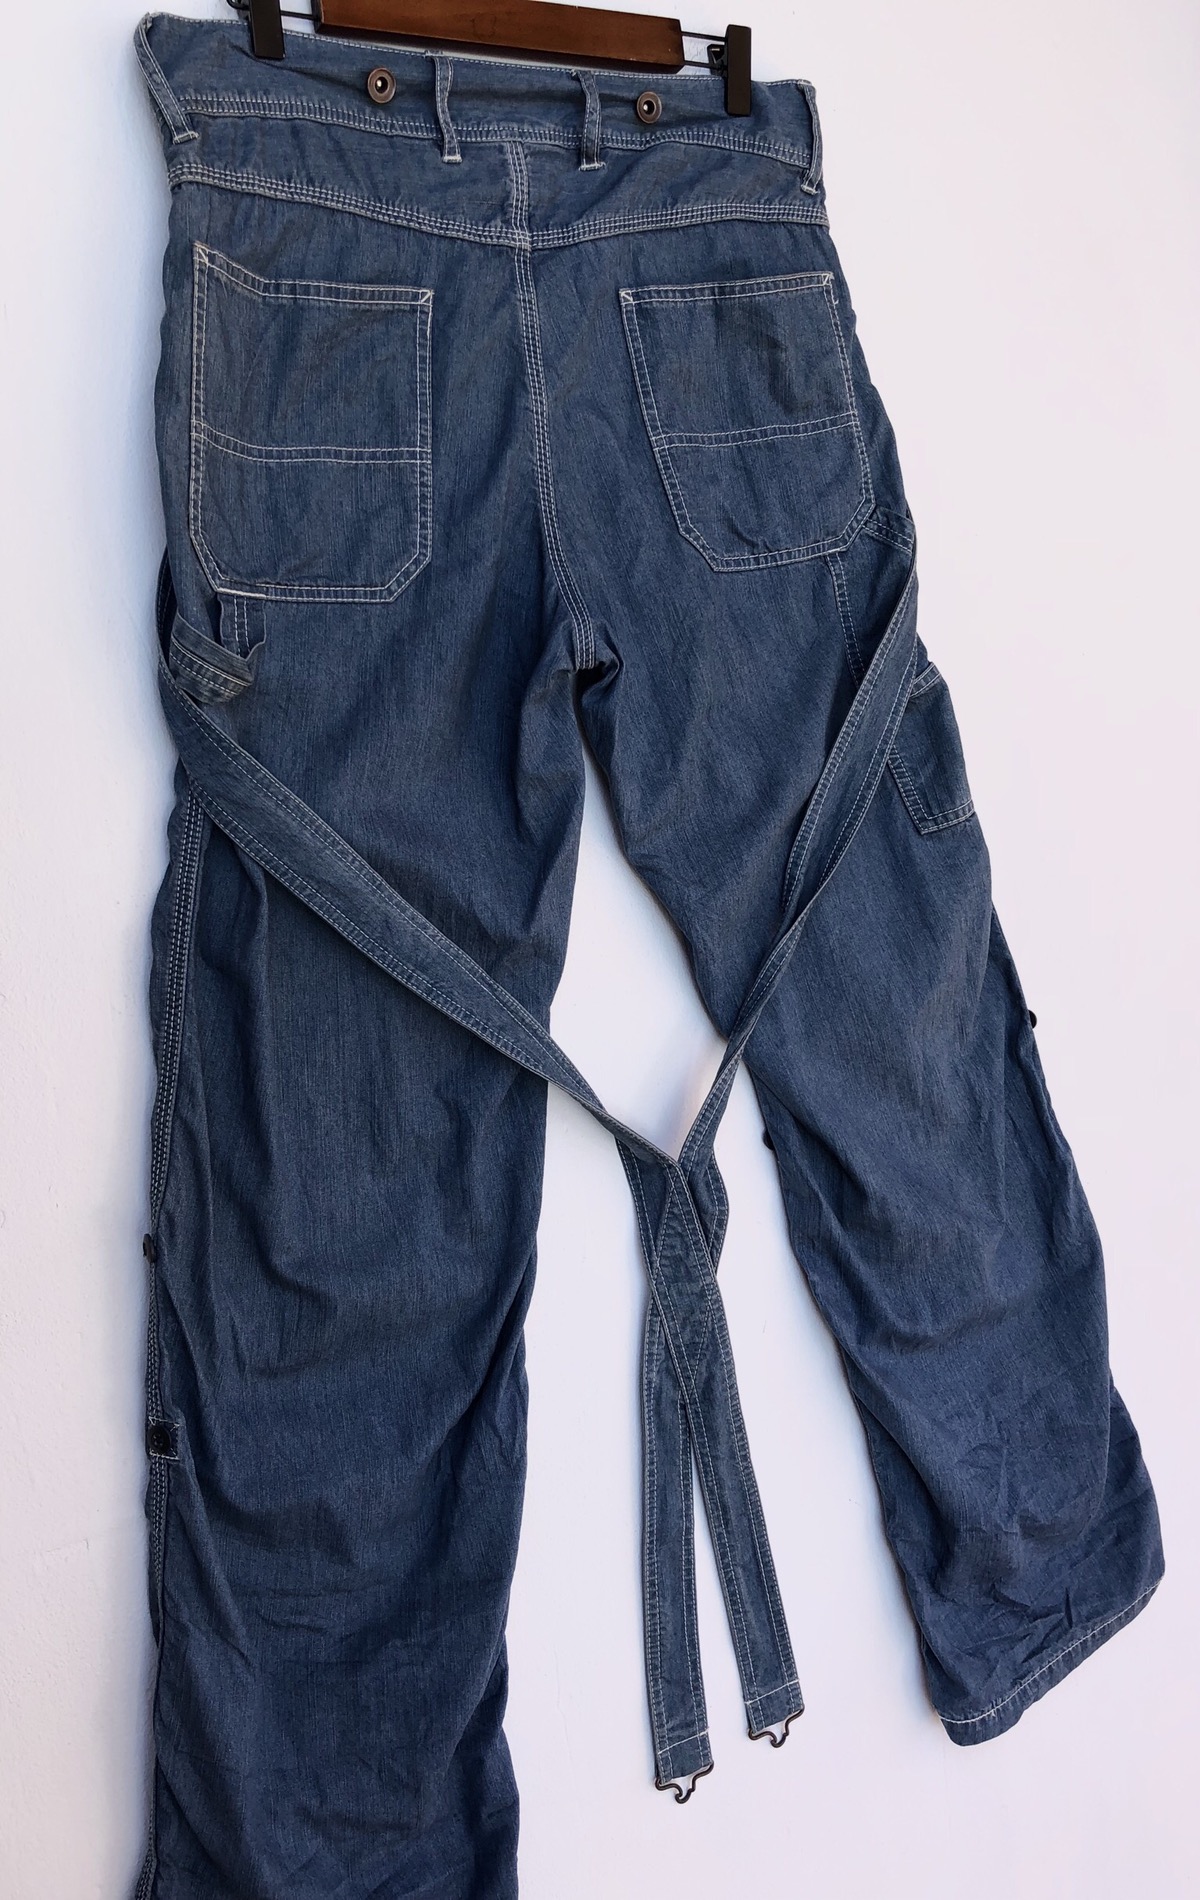 Workers - JAPANESE BRAND RAGEBLUE OVERALL WORKWEAR STYLE - 8